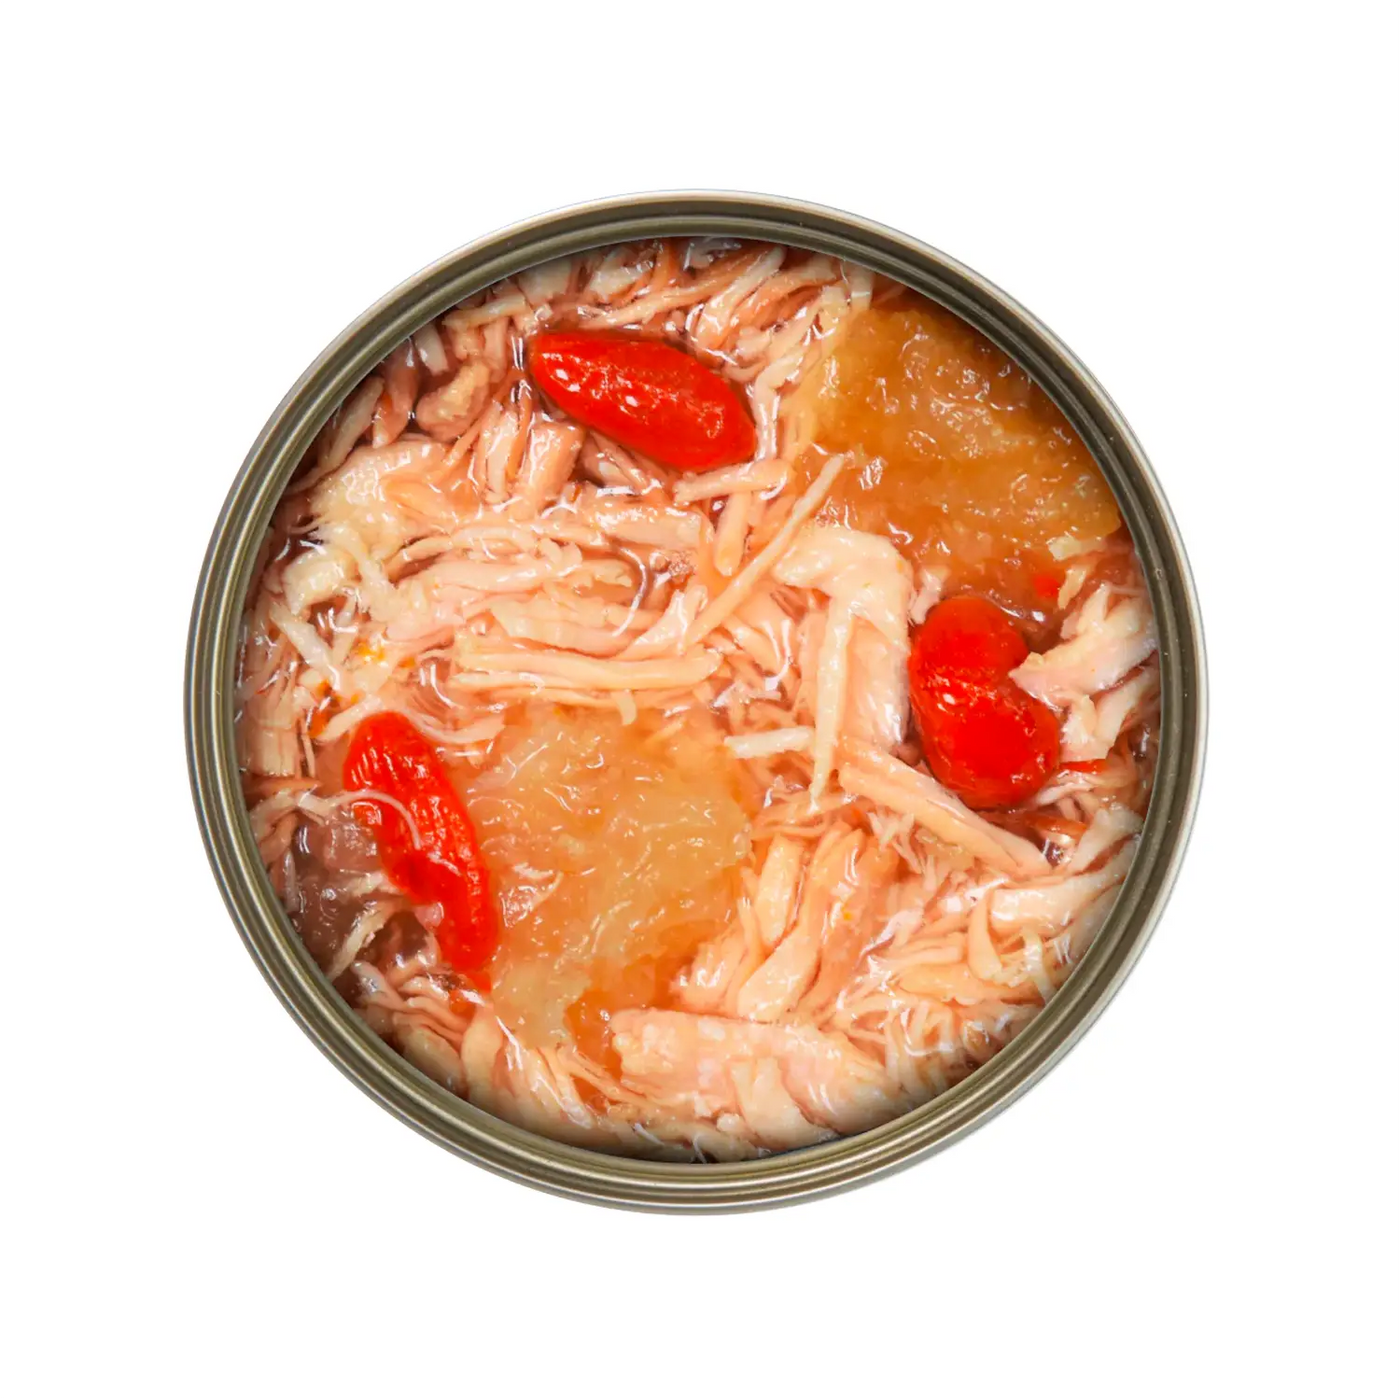 Kakato - Simmered Chicken With Fish Maw & Goji Berries (Dogs & Cats) Canned 70g